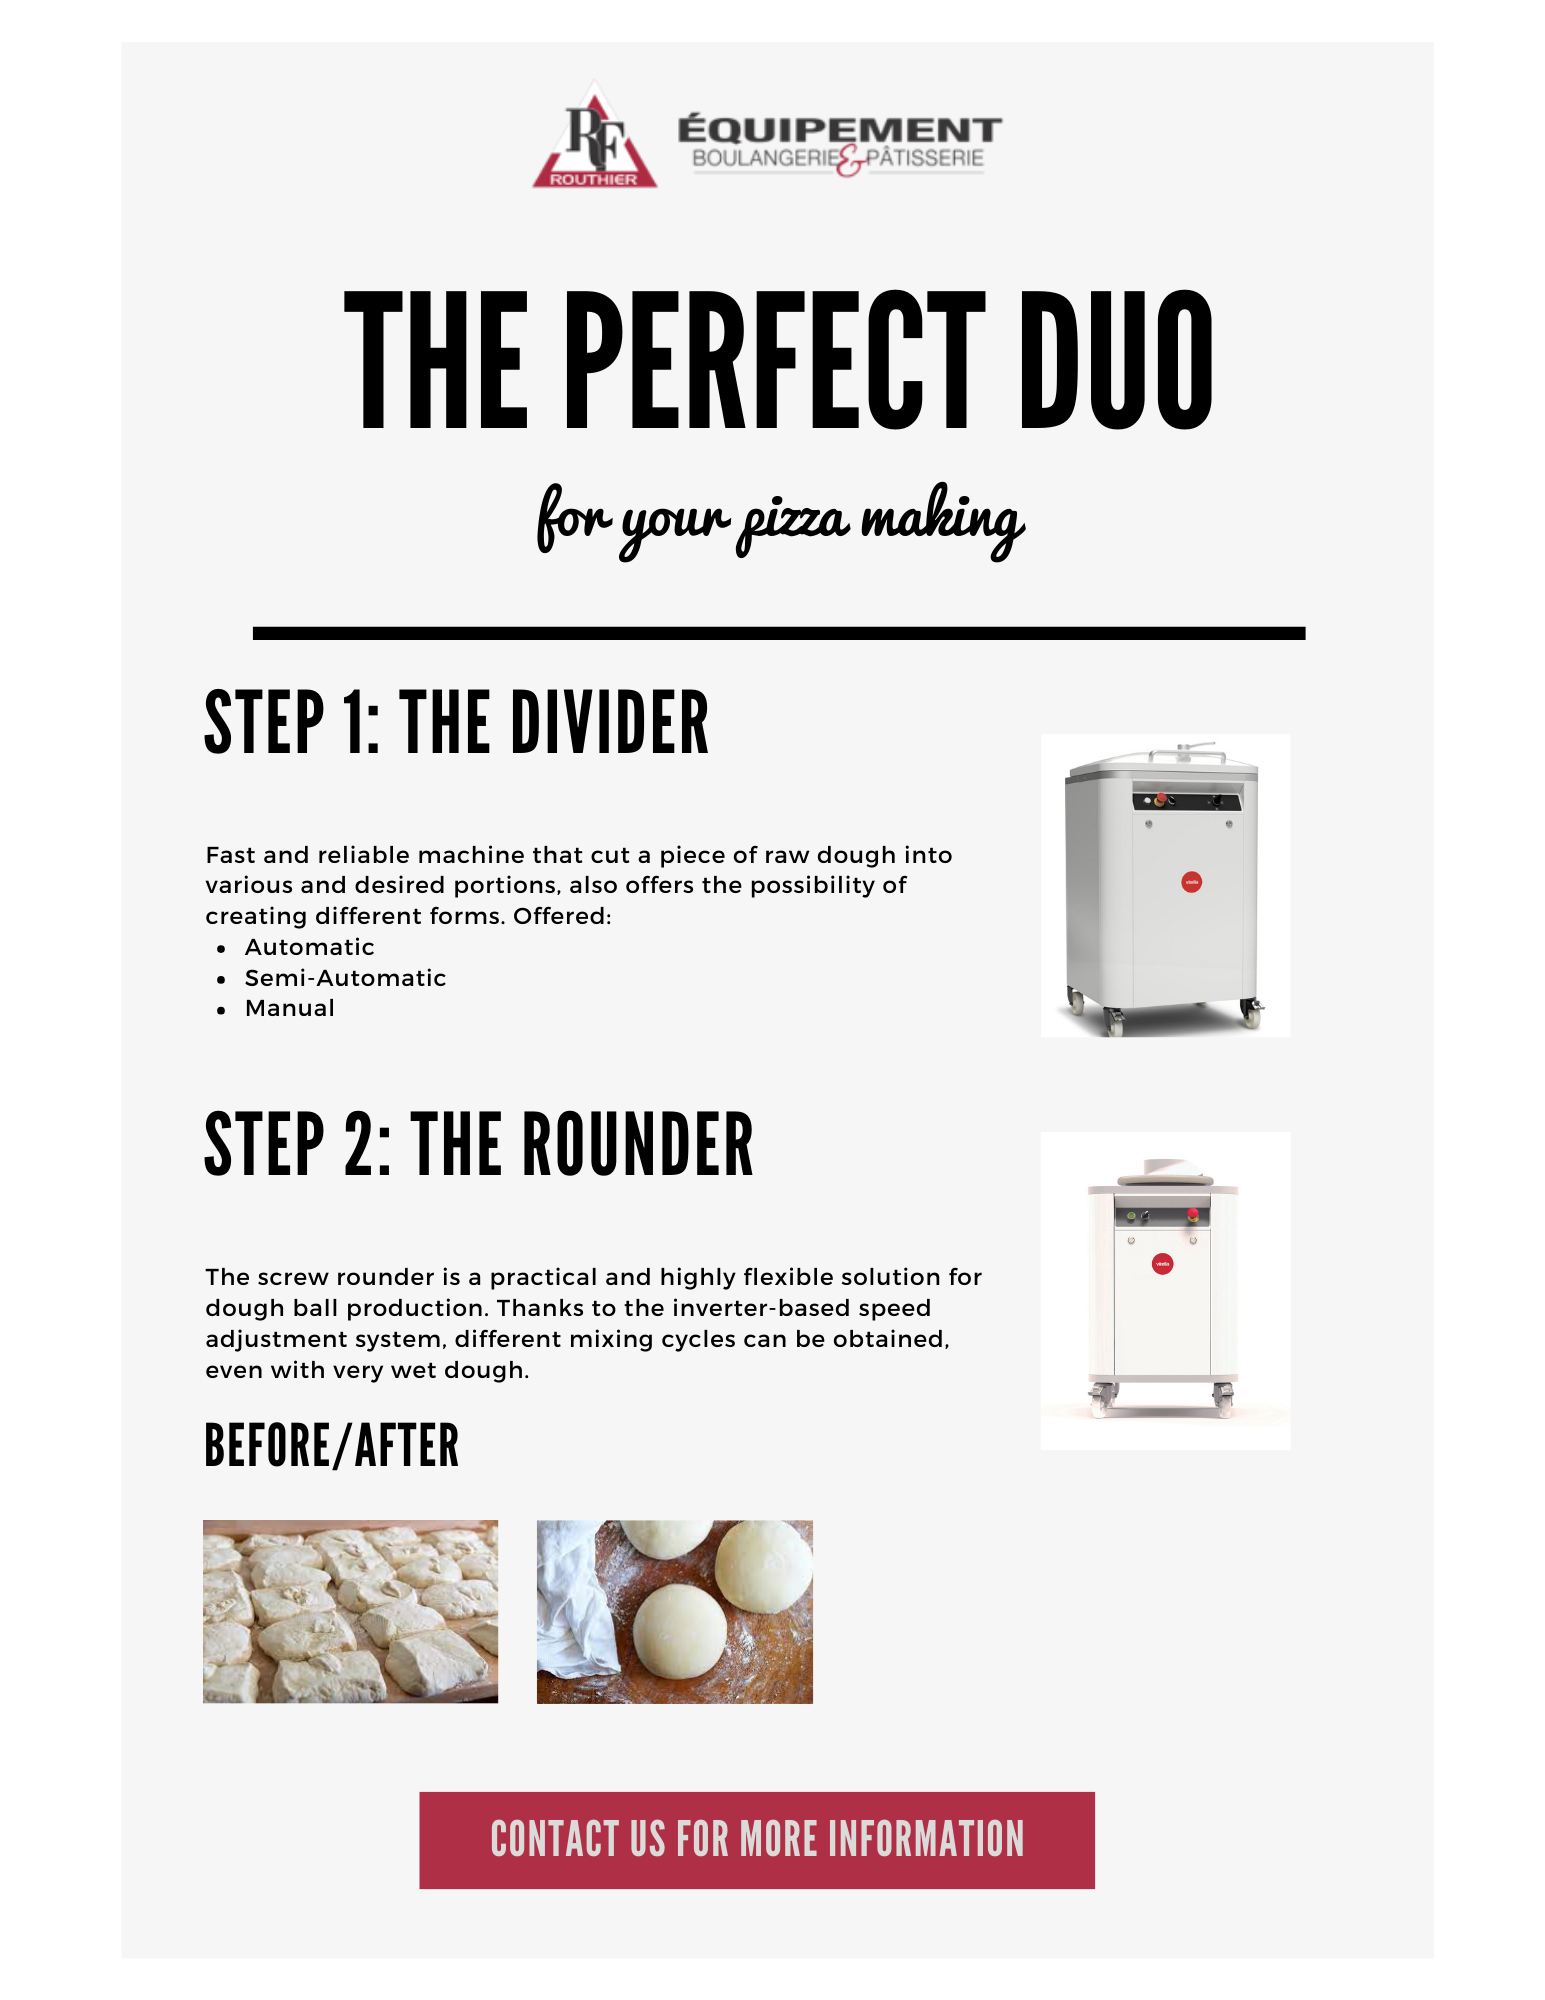 Revolutionize your Pizza Production: Introducing the Perfect Duo